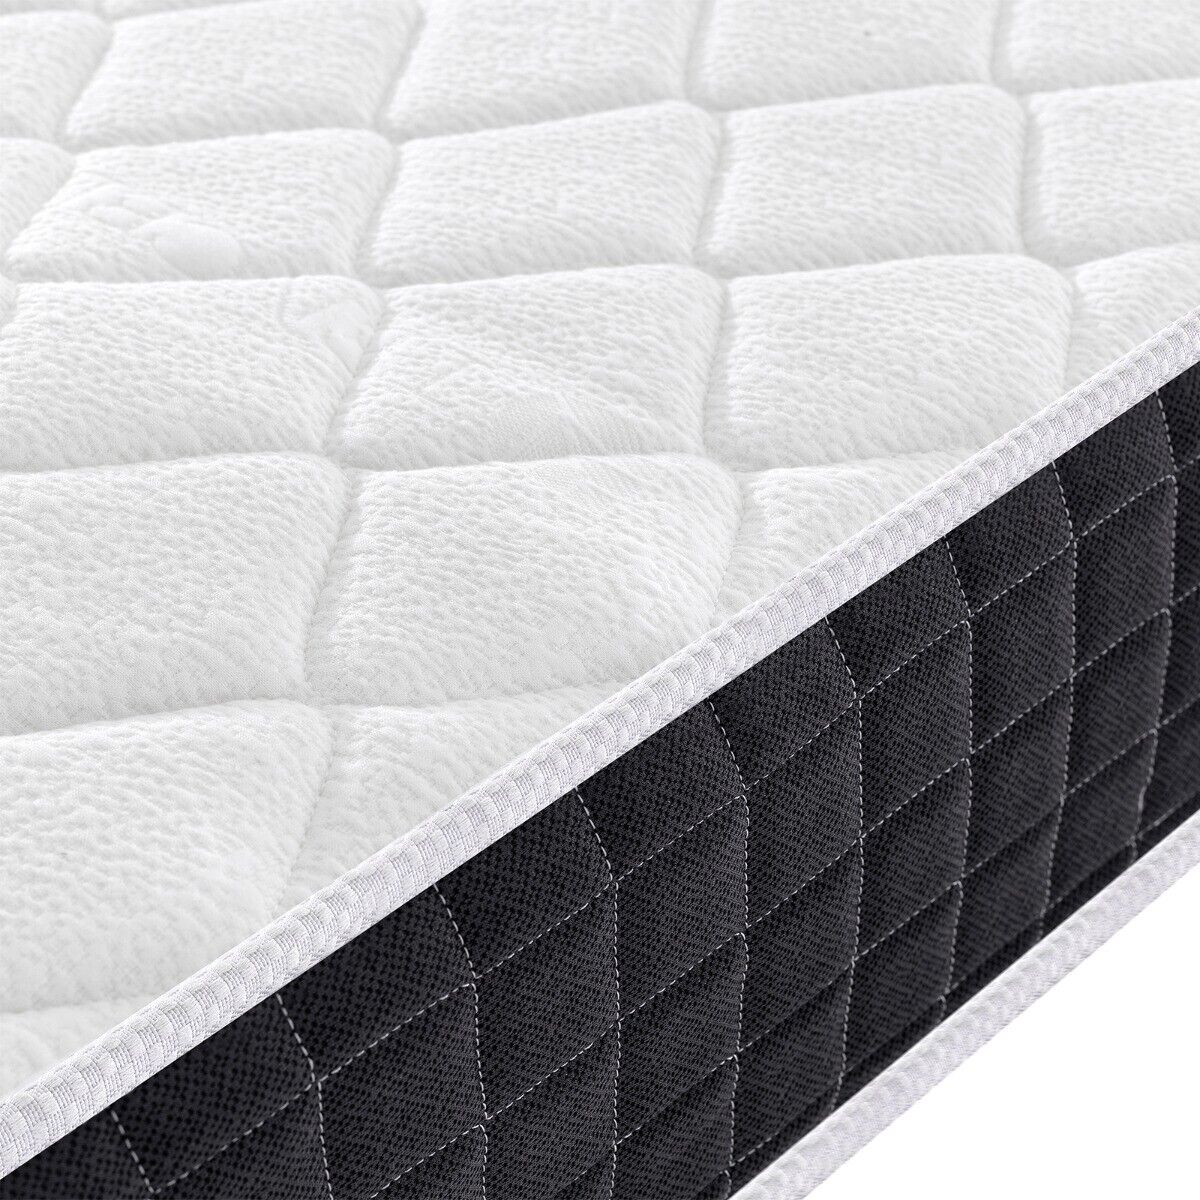 Cloud Pocket Sprung Micro Quilted Mattress Various Sizes